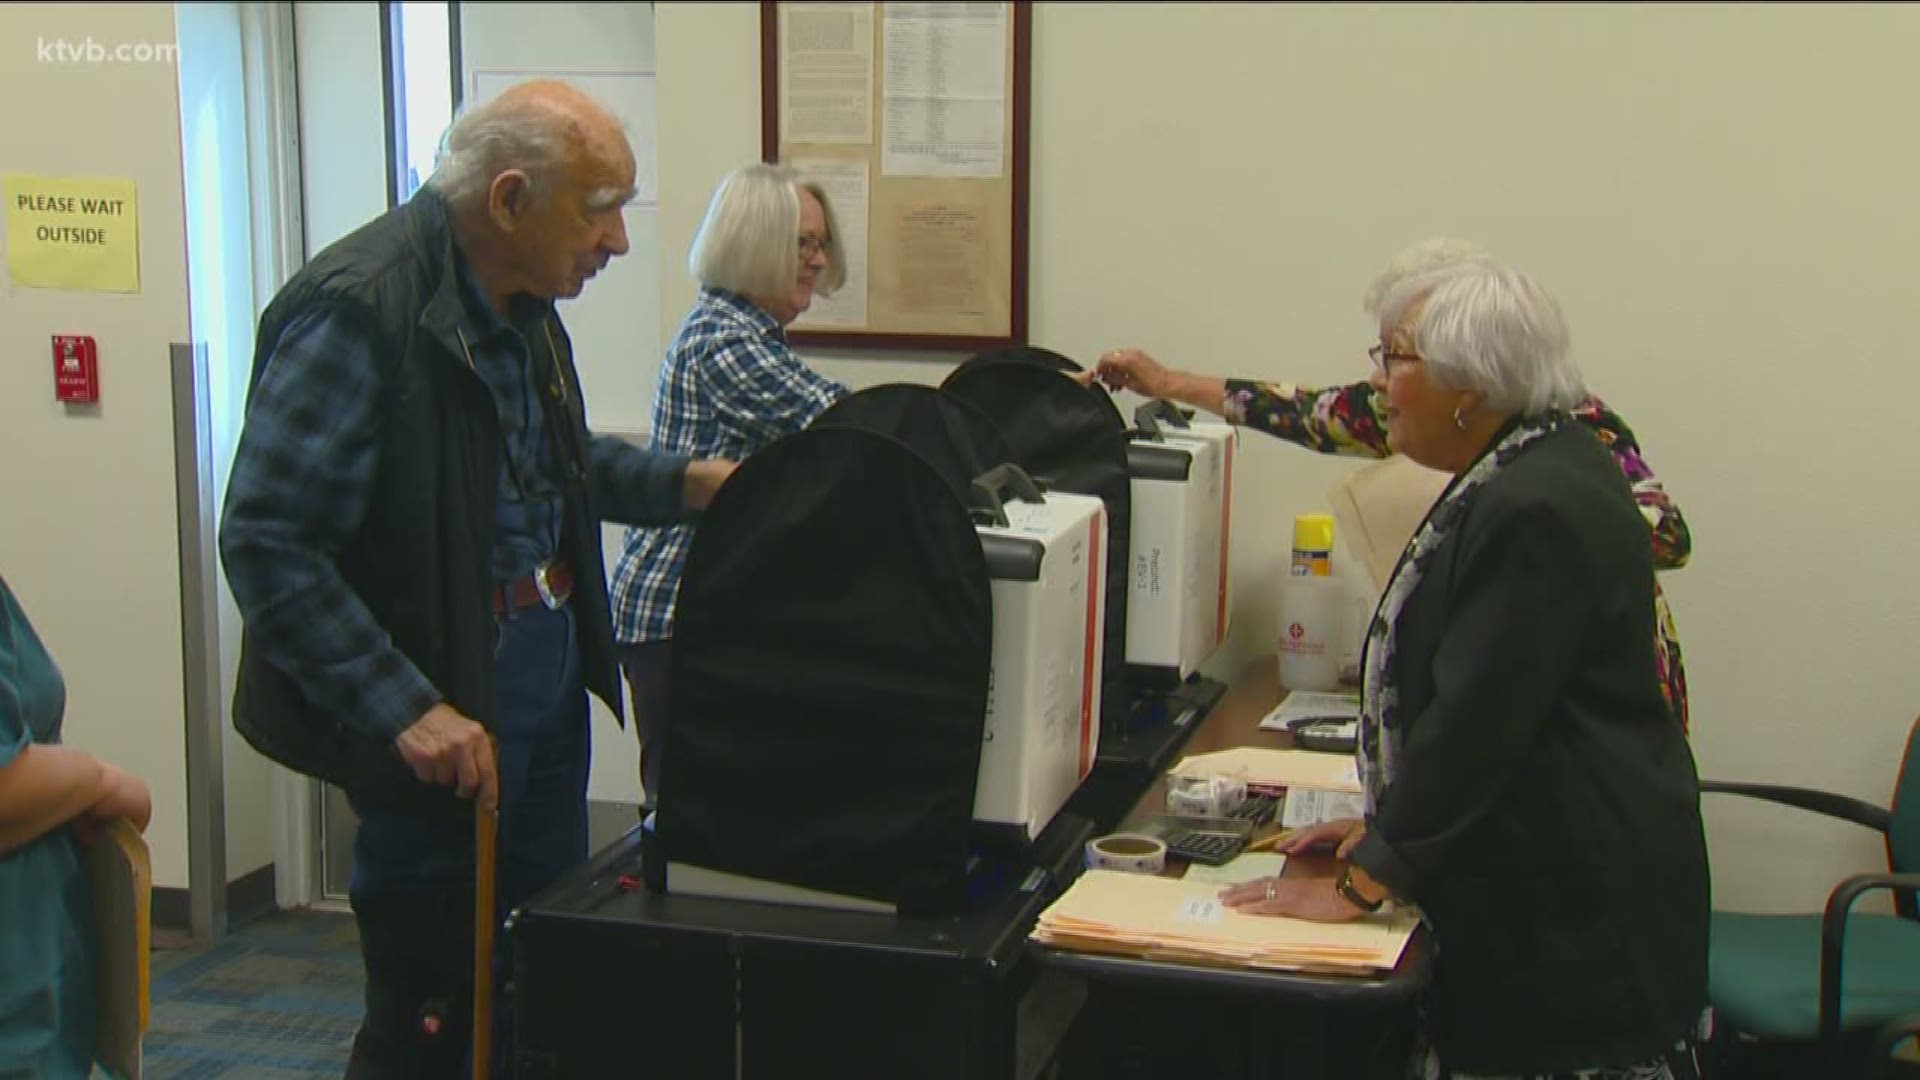 Officials in both counties pointed to issues with vote tabulation machines that caused discrepancies in the final count.